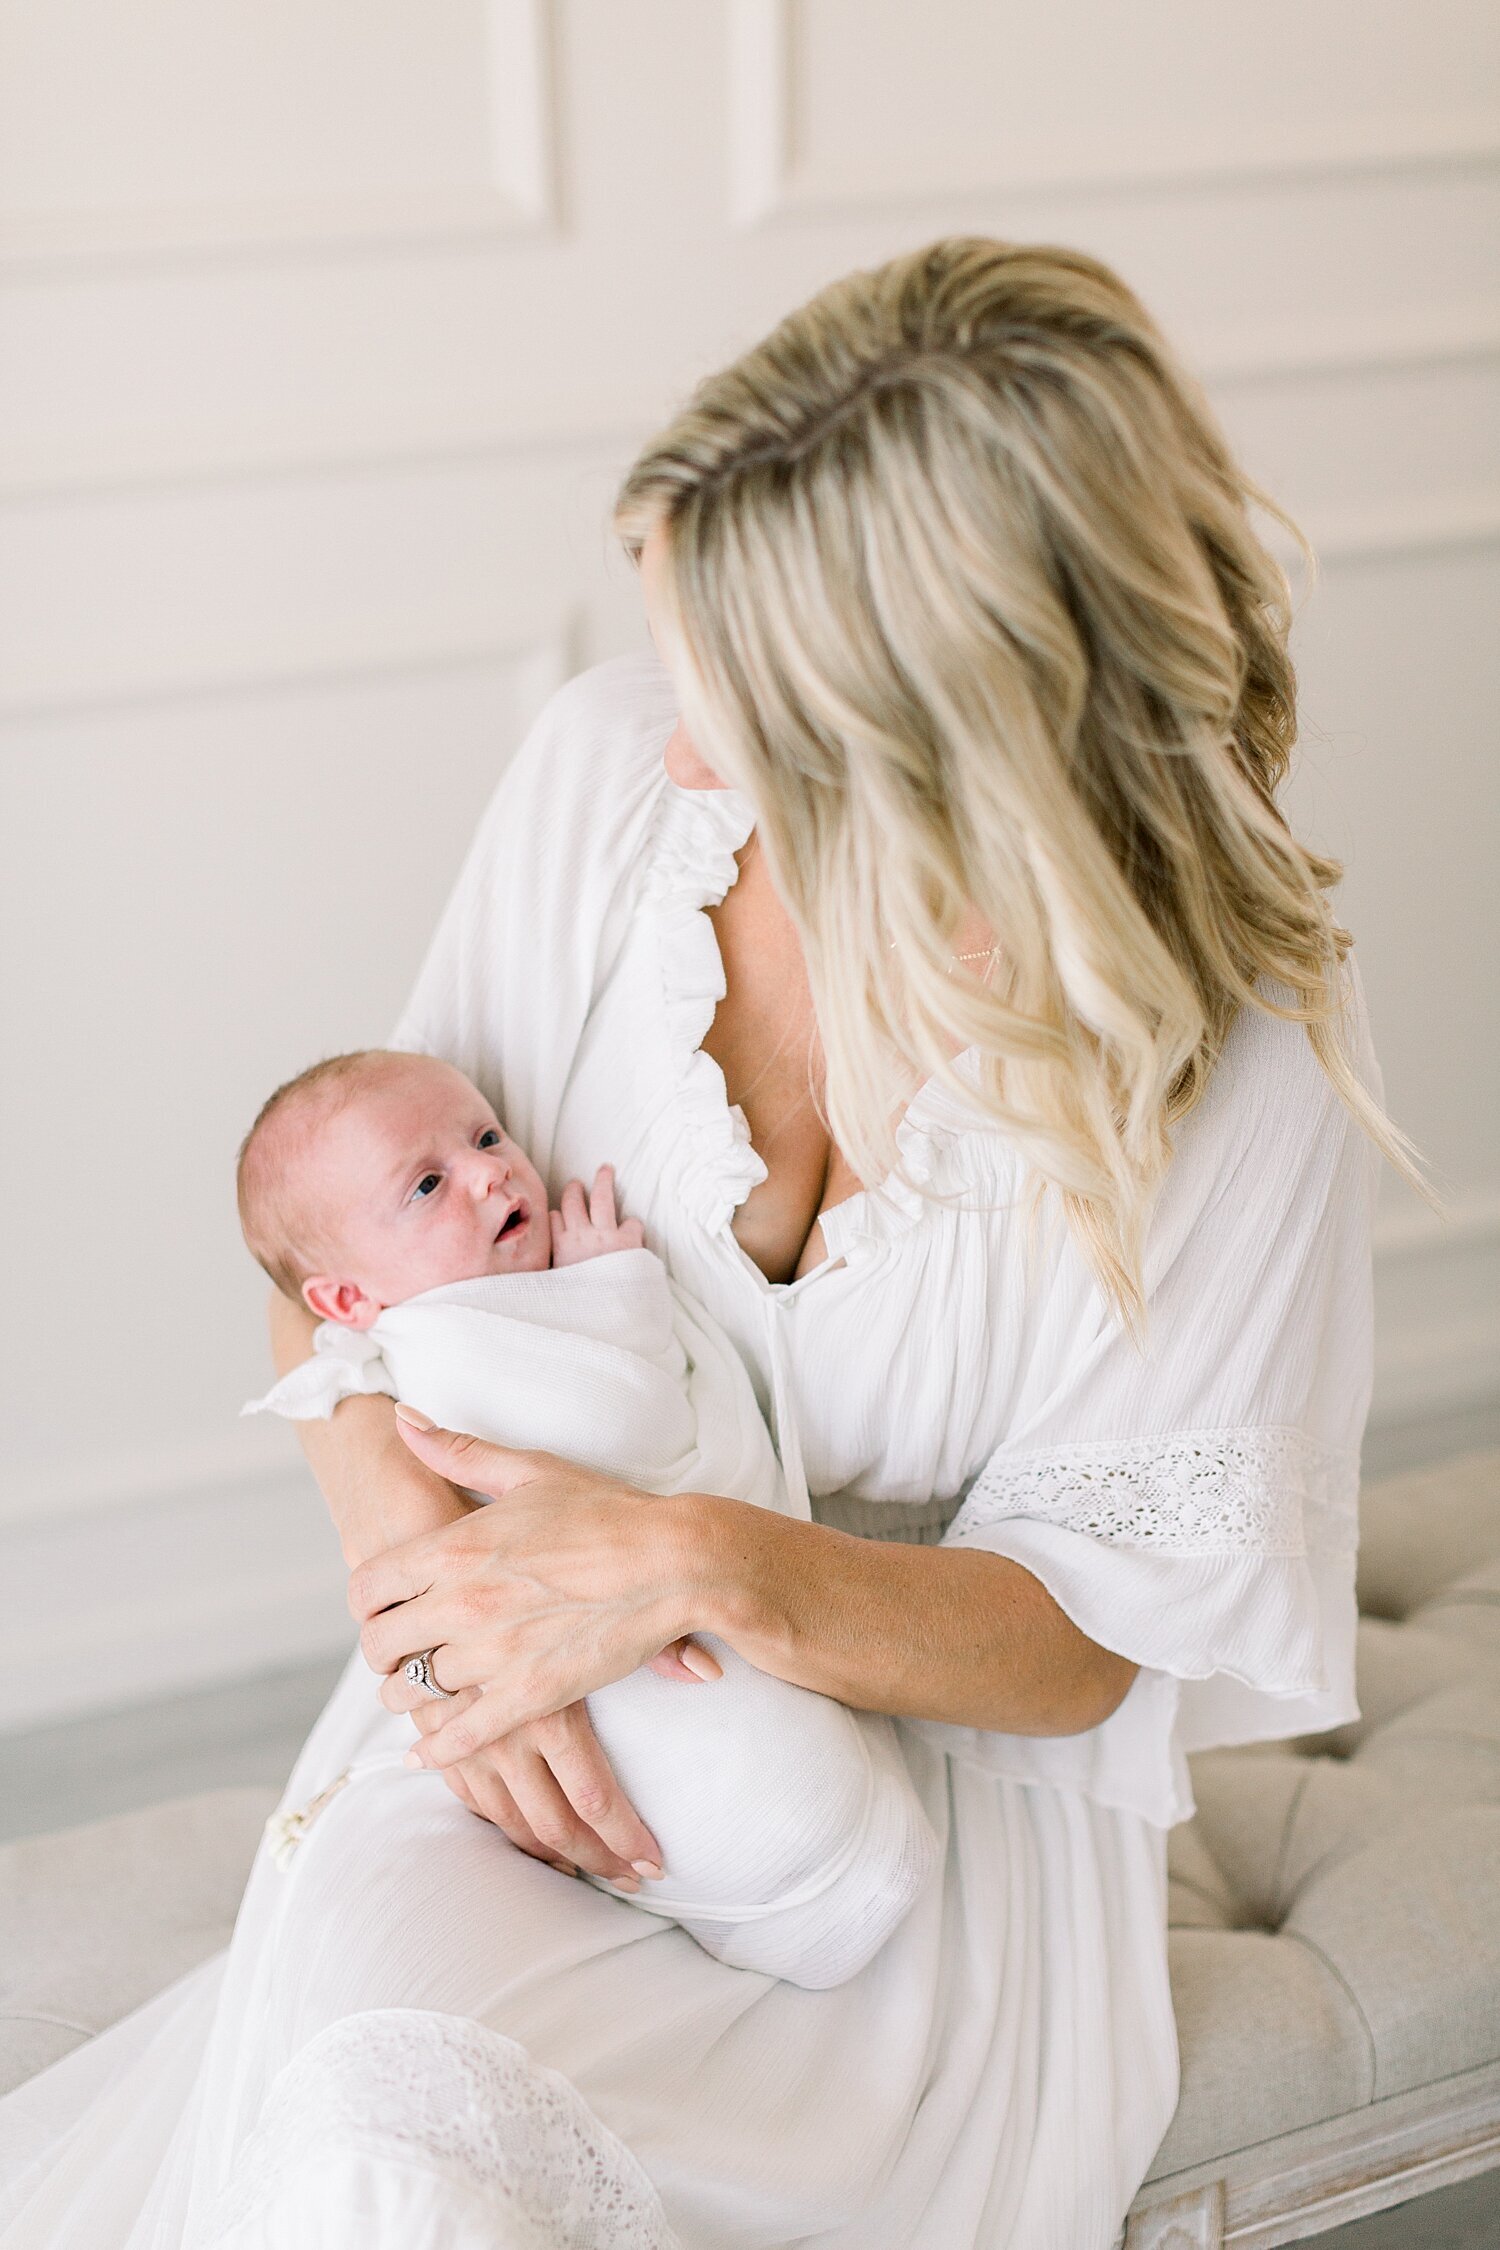 Mom and newborn baby boy | Photos by Ambre Williams Photography